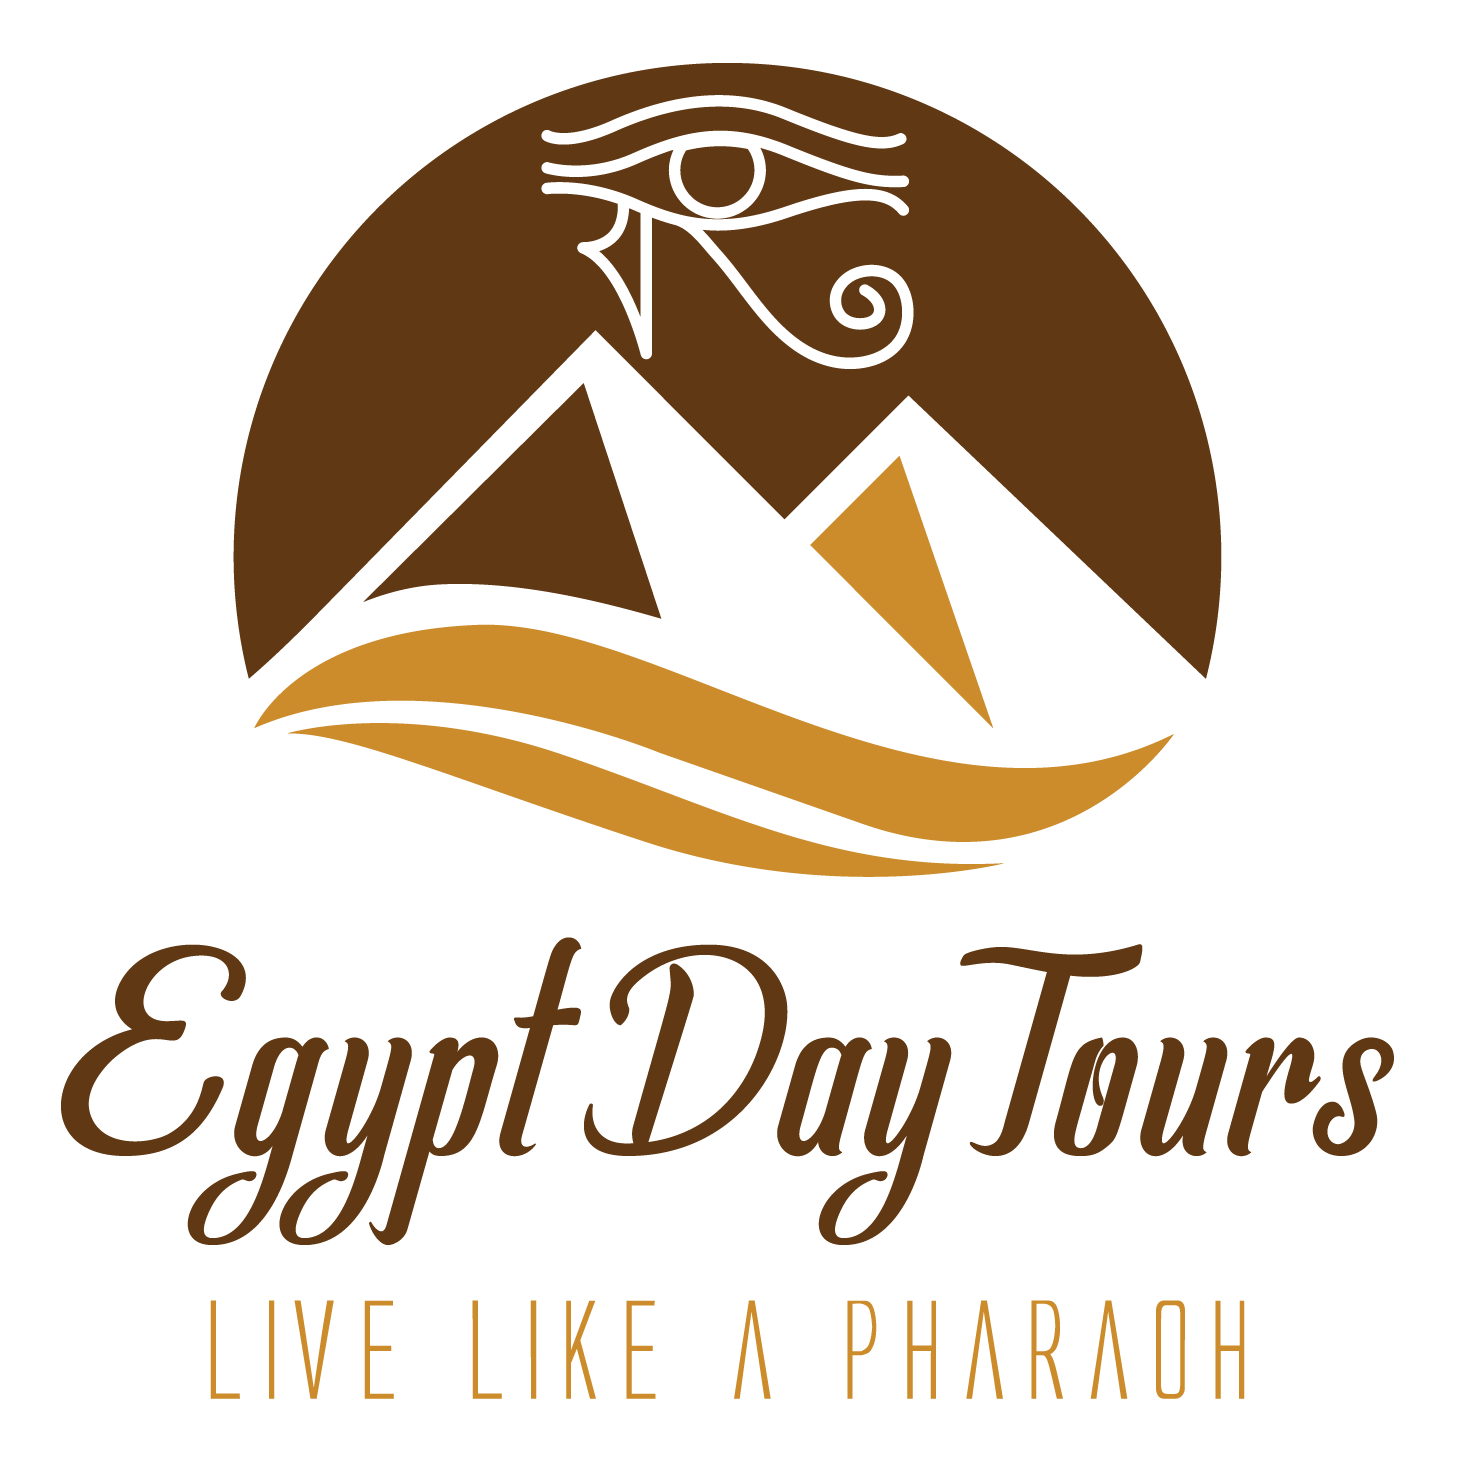 Egypt Day Tours | Tours in Cairo - Cairo day tours - Top 10 tours in Cairo